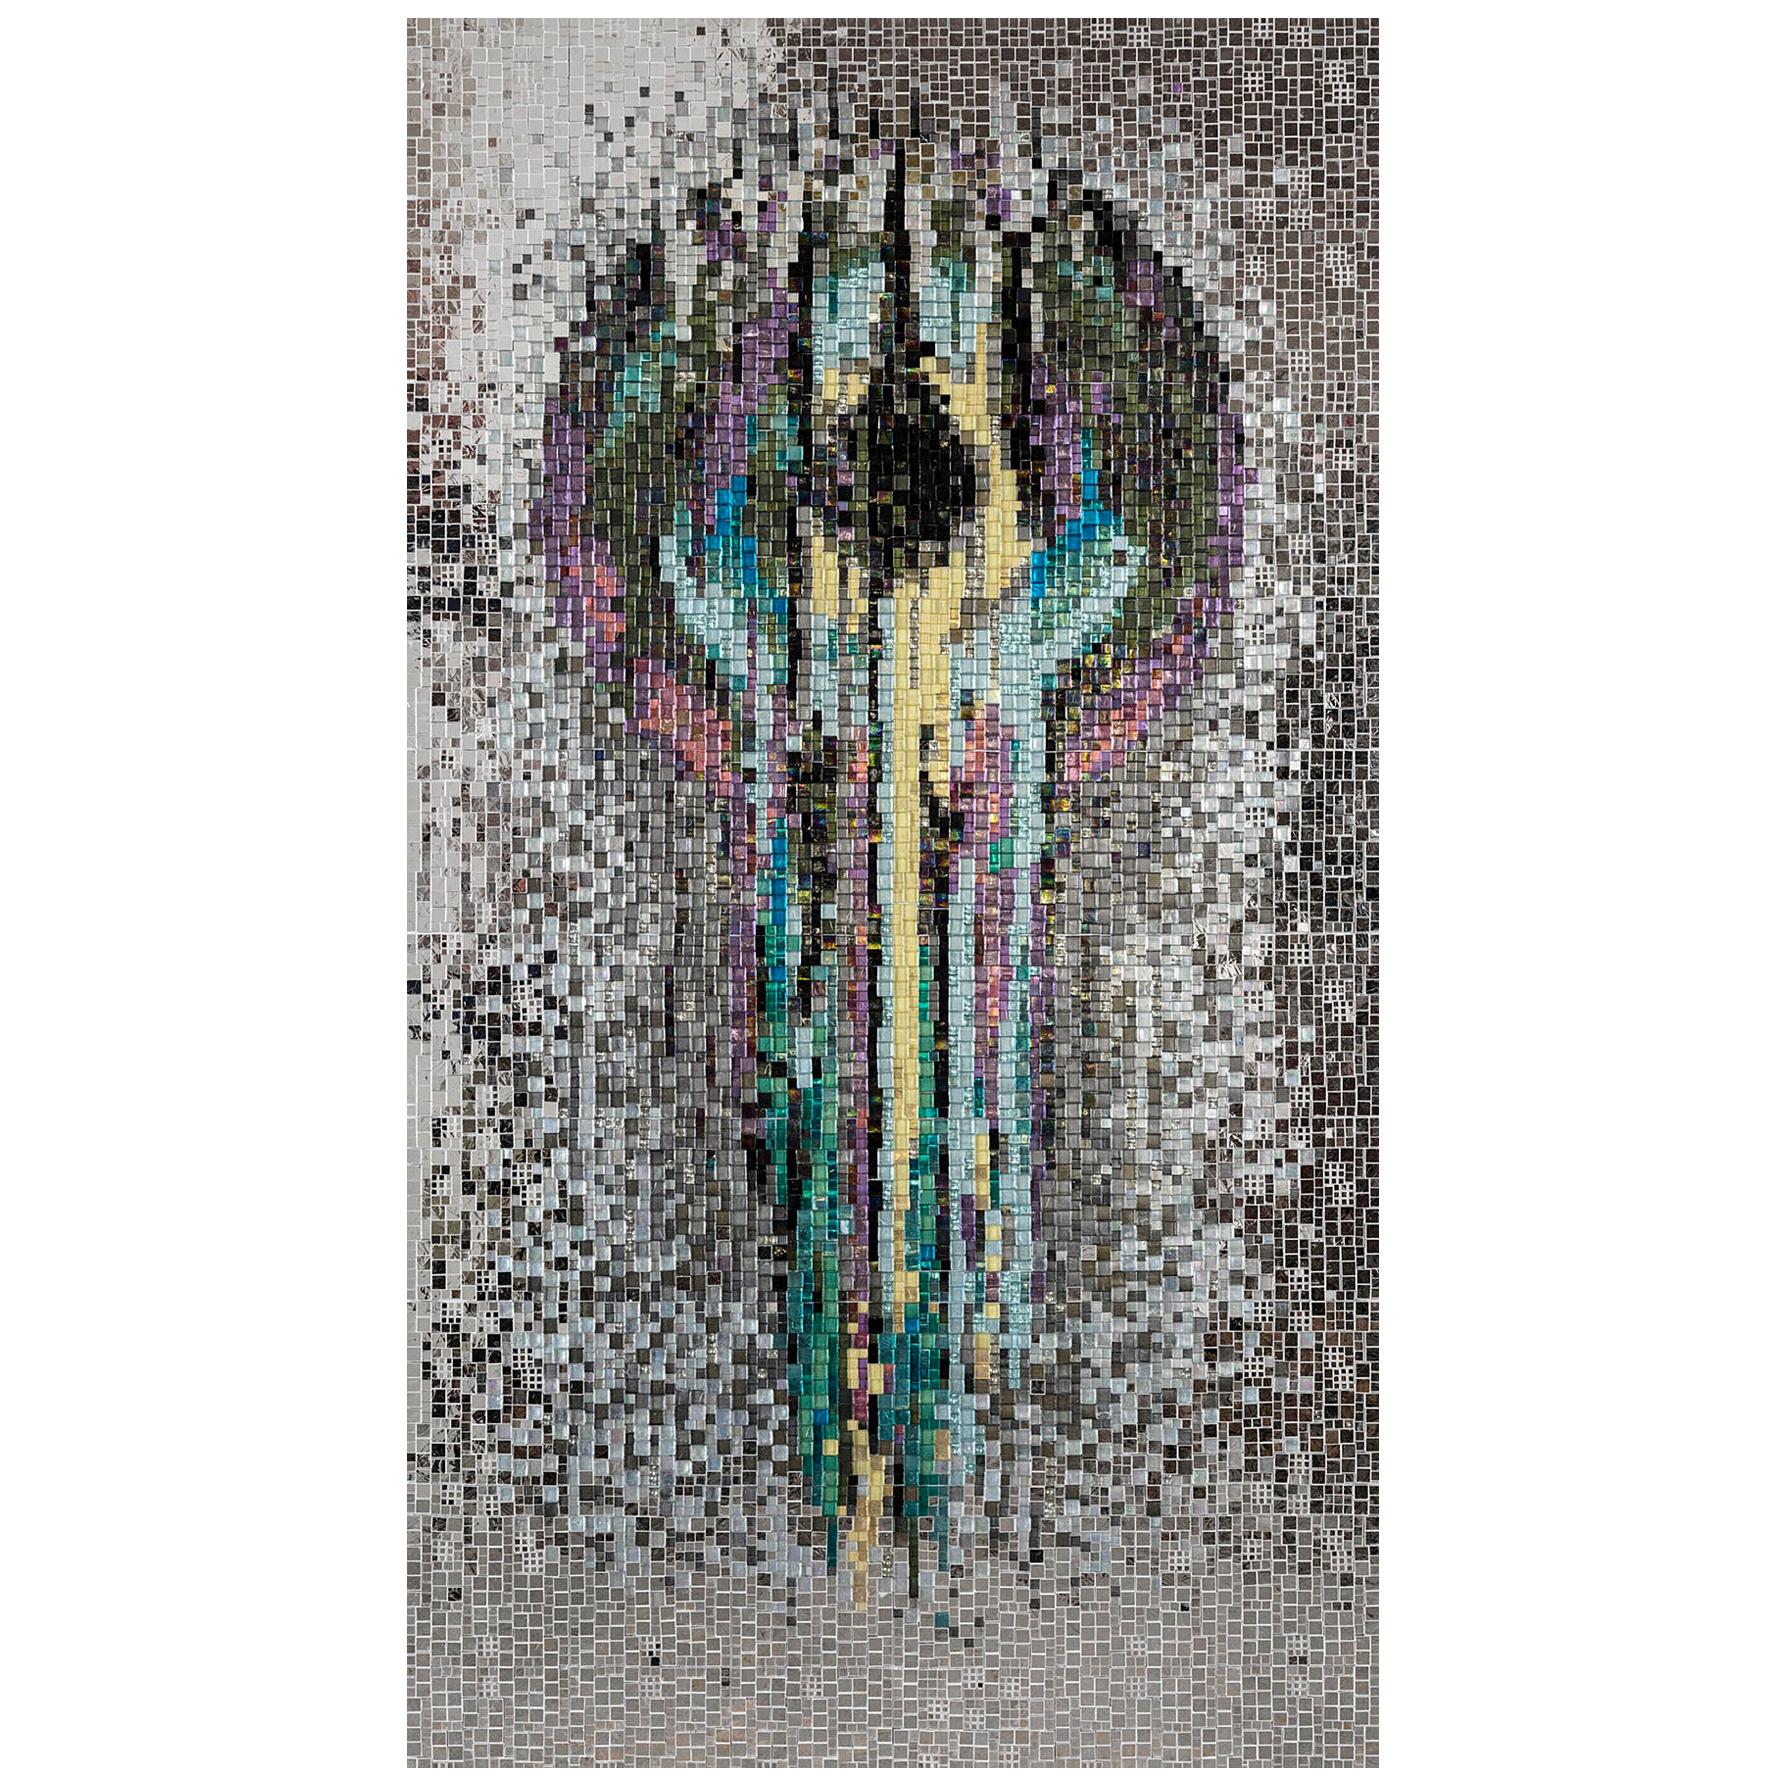 Artistic Mosaic Handmade on Aluminum Panel Dimension and Colors Customizable For Sale